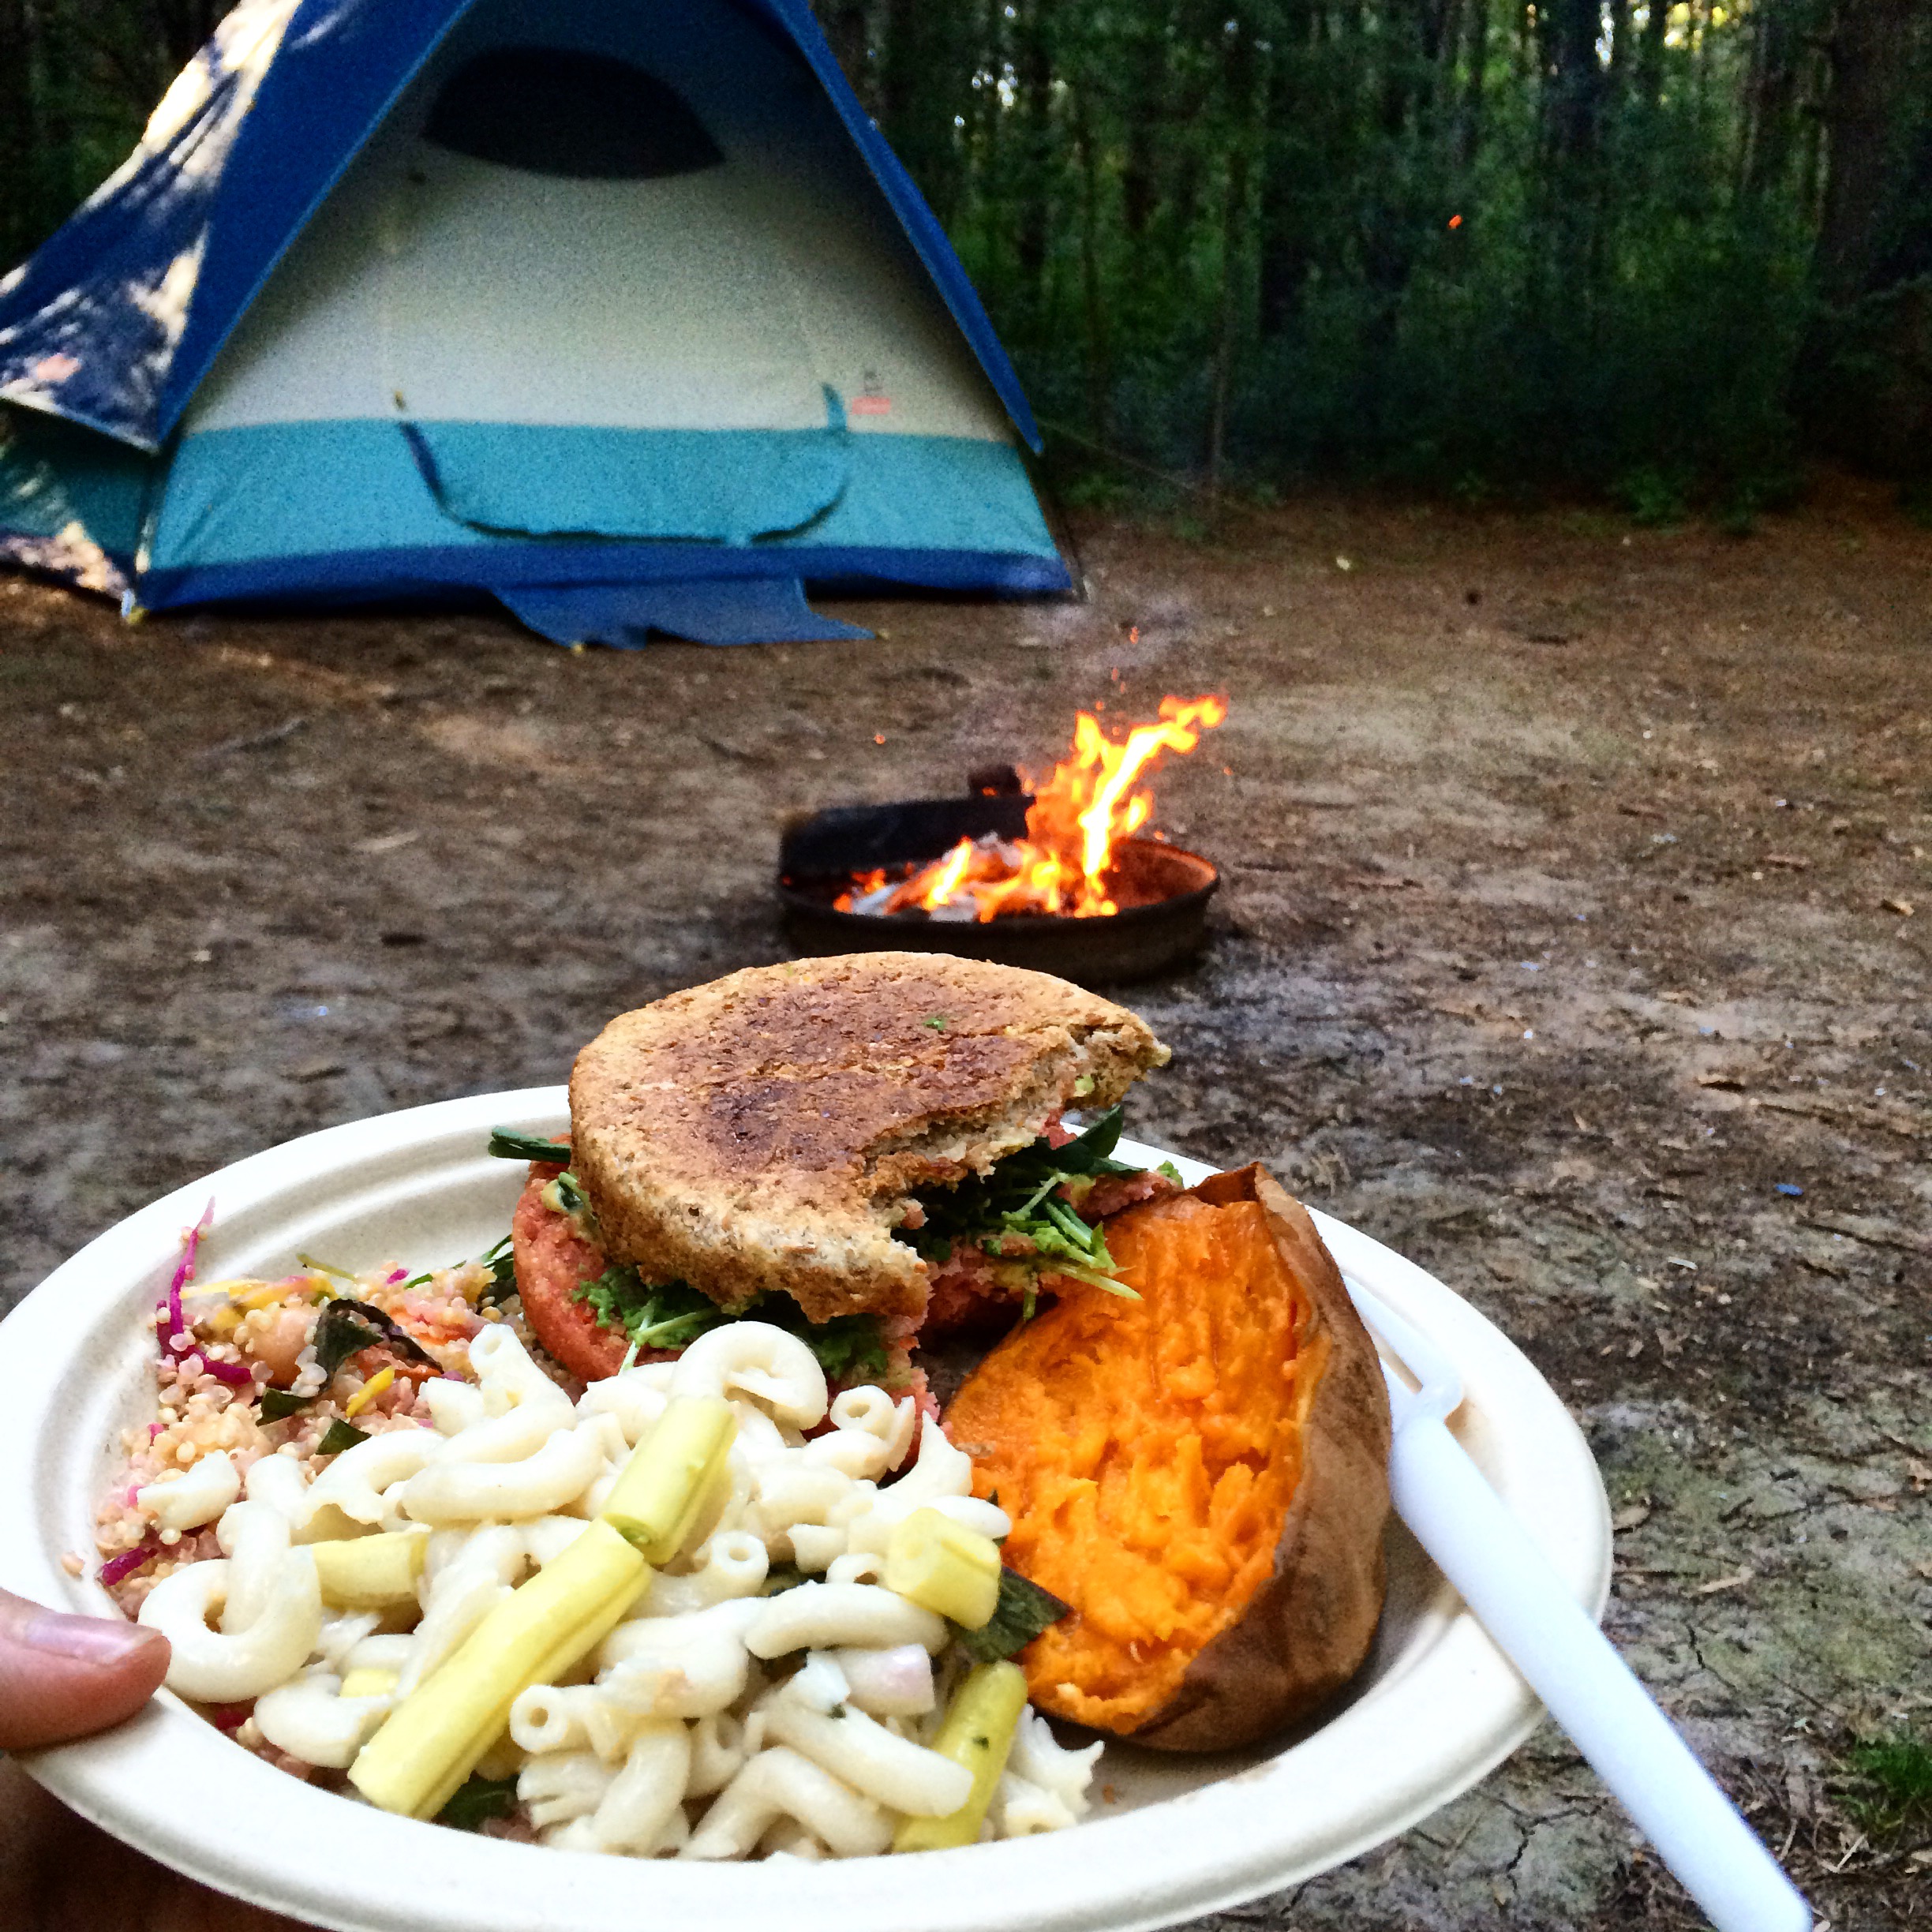 Camping and Healthy Food, Yes it is Possible! - Marni Wasserman